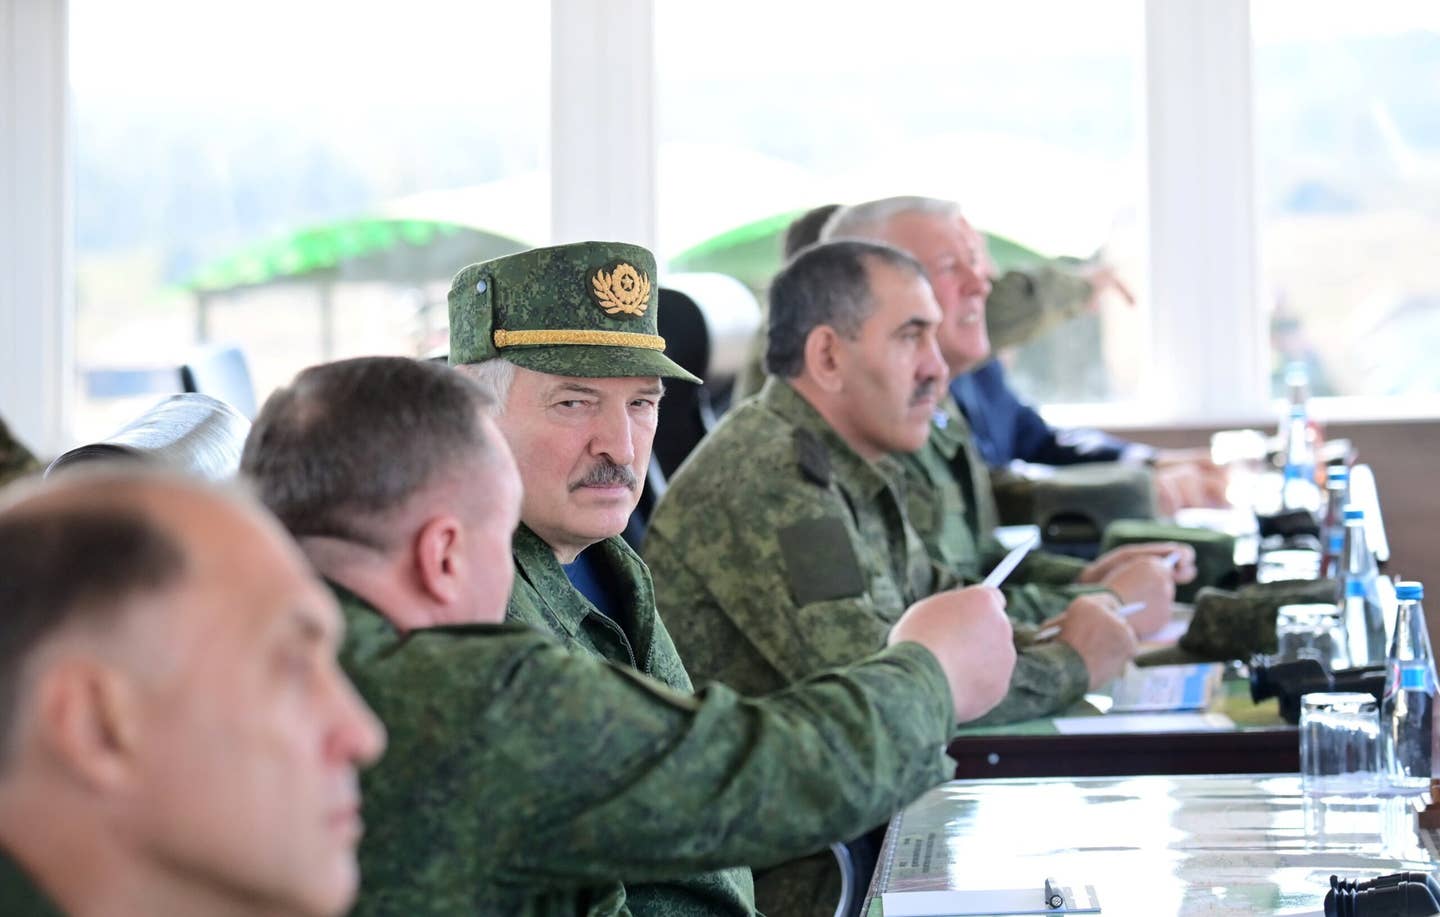 Belarusian President Alexander Lukashenko inspects the joint strategic exercise Zapad-2021 by Russian and Belarusian armed forces at a training ground in Belarus on September 12, 2021. <em>Photo by Xinhua via Getty Images</em>